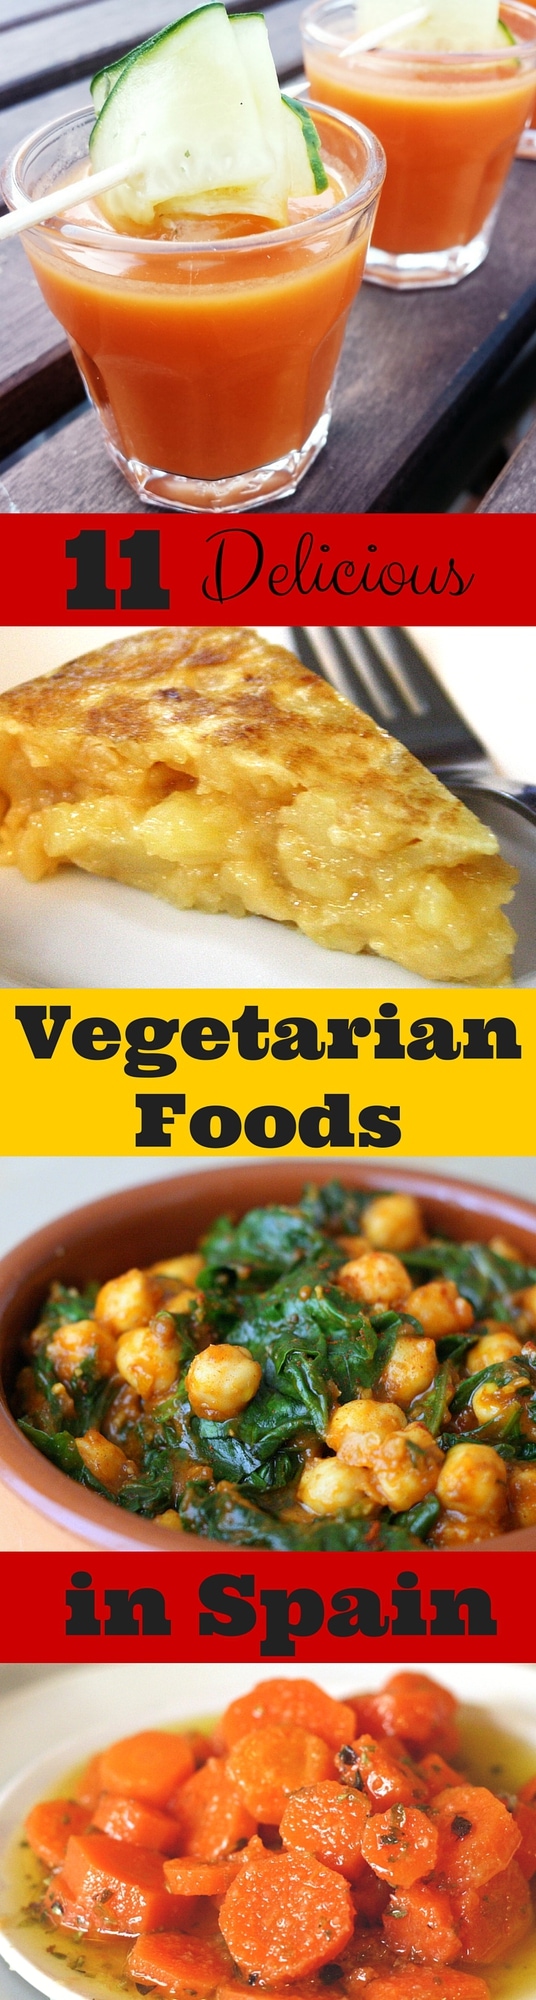 20 Delicious Vegetarian Options In Spain Vegetarian Tapas Recipes,How To Change A Light Socket Uk